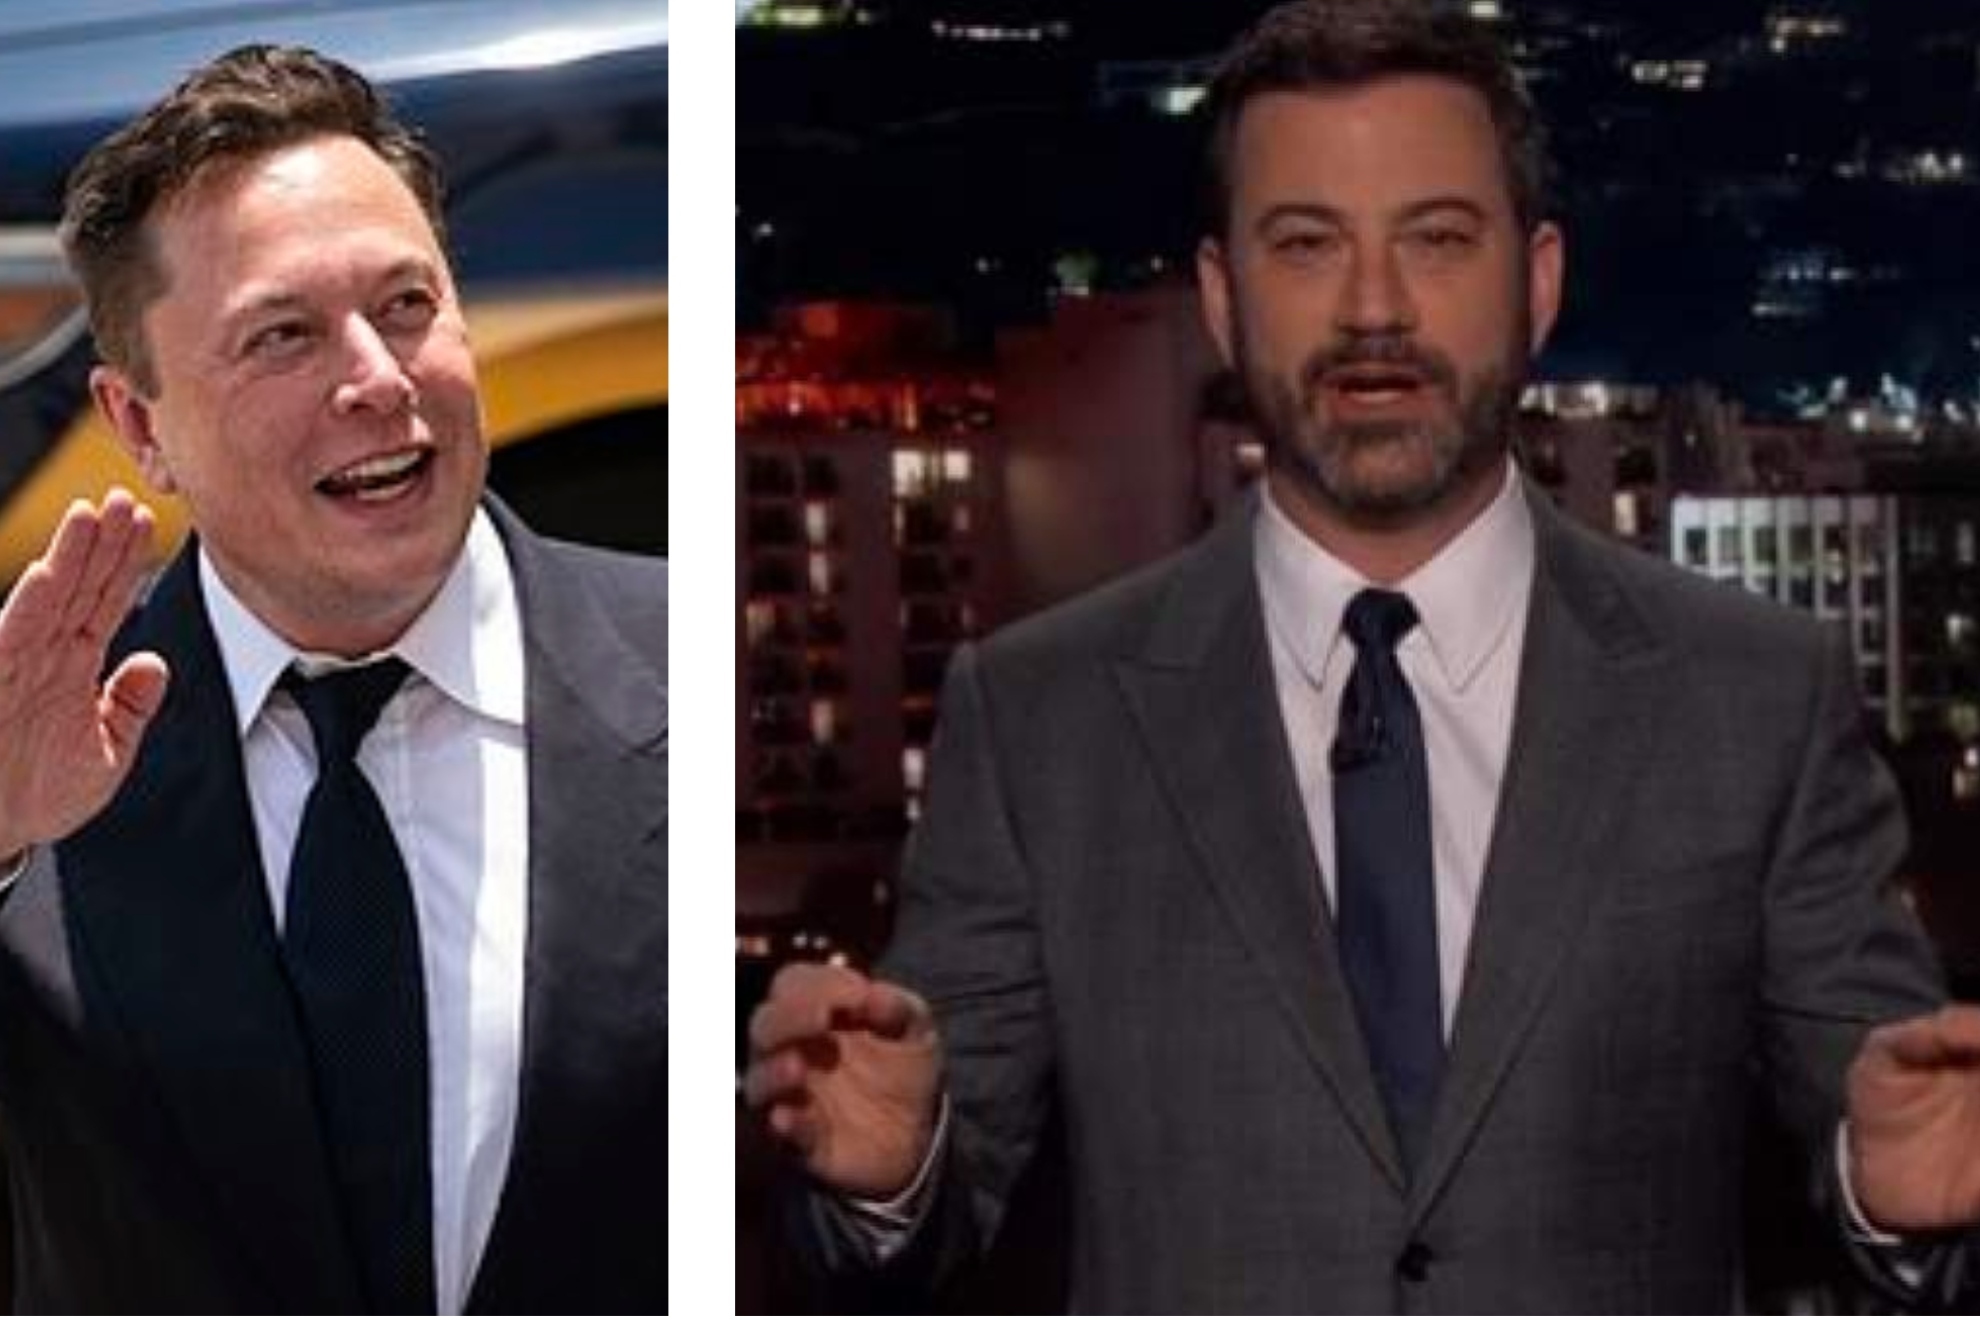 Jimmy Kimmel goes in hard on Elon Musk: You're a piece of s**t